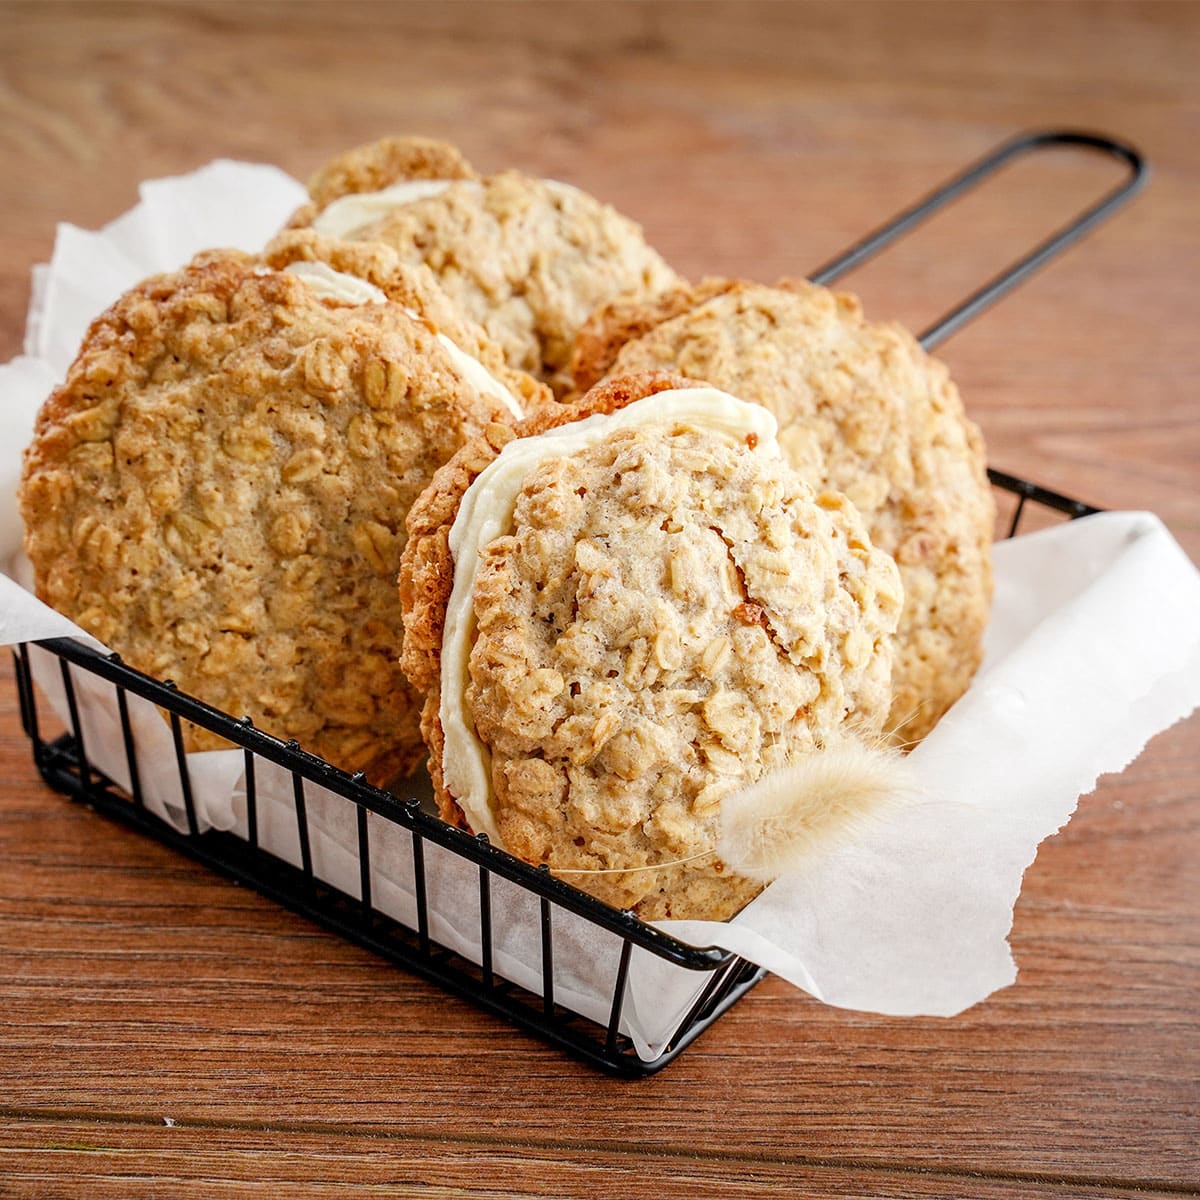 How to make little debbie oatmeal cream pies at home